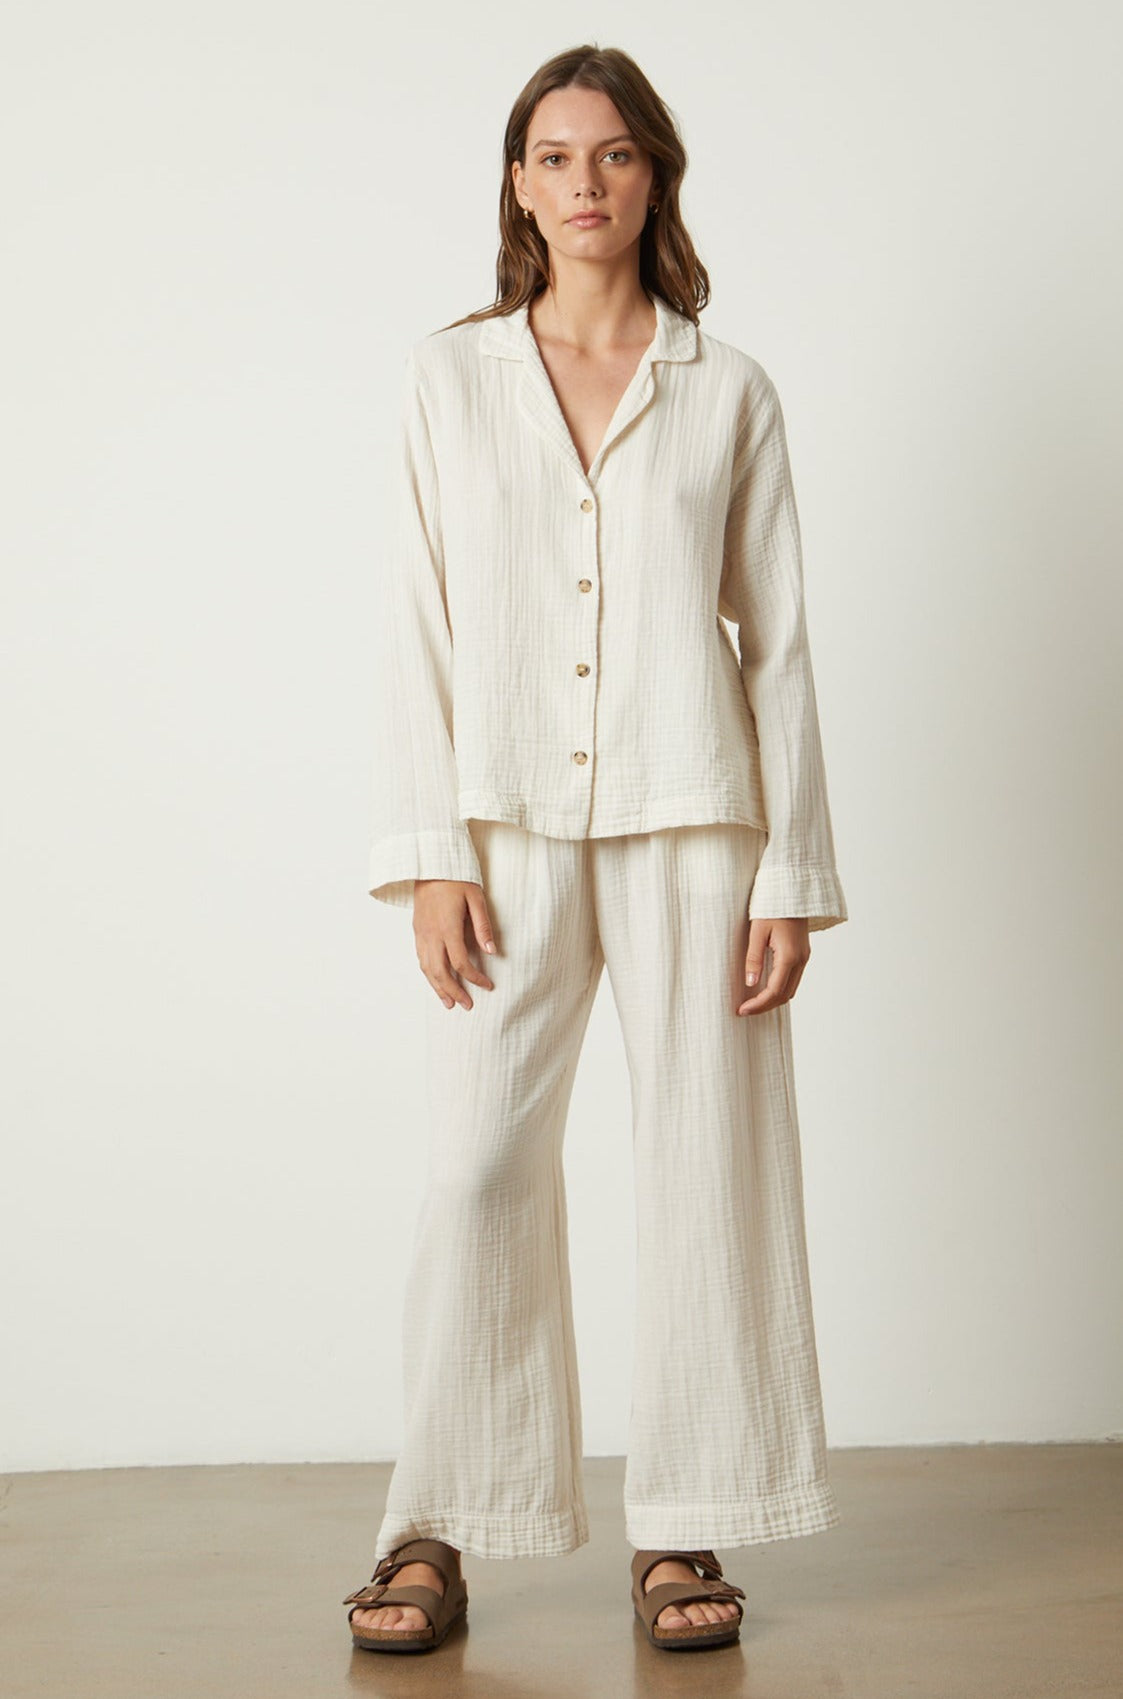   The model is wearing a white linen Jenny Graham Home pajama set. 